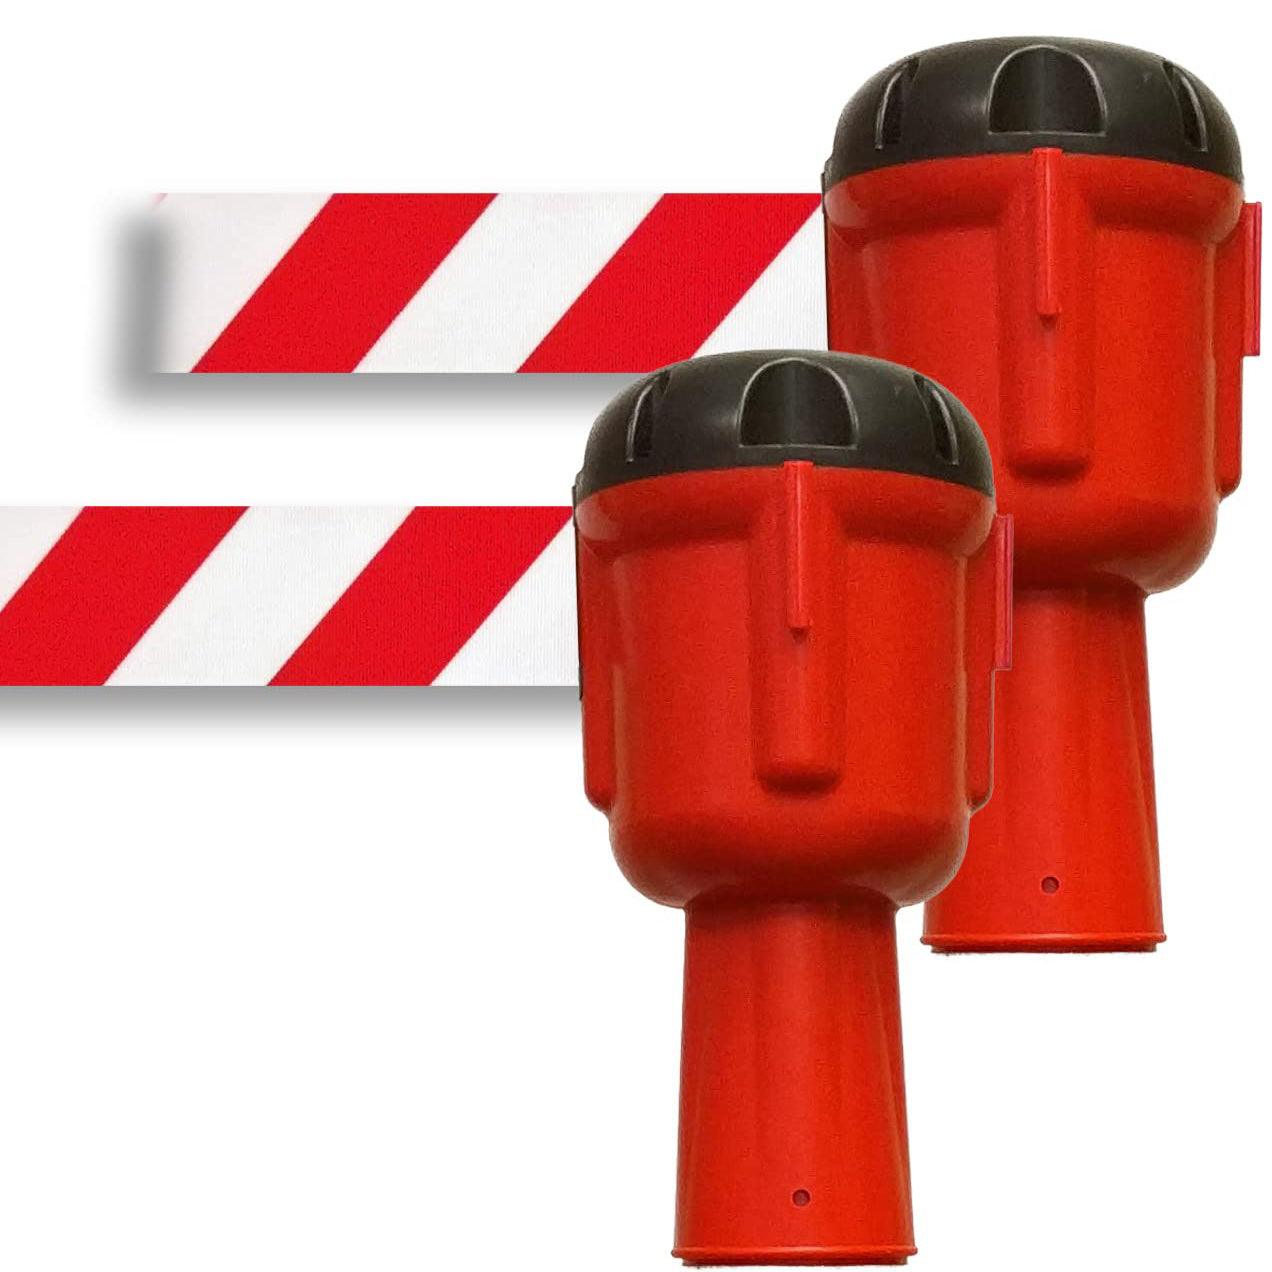 9 Meter Traffic Cone Toppers